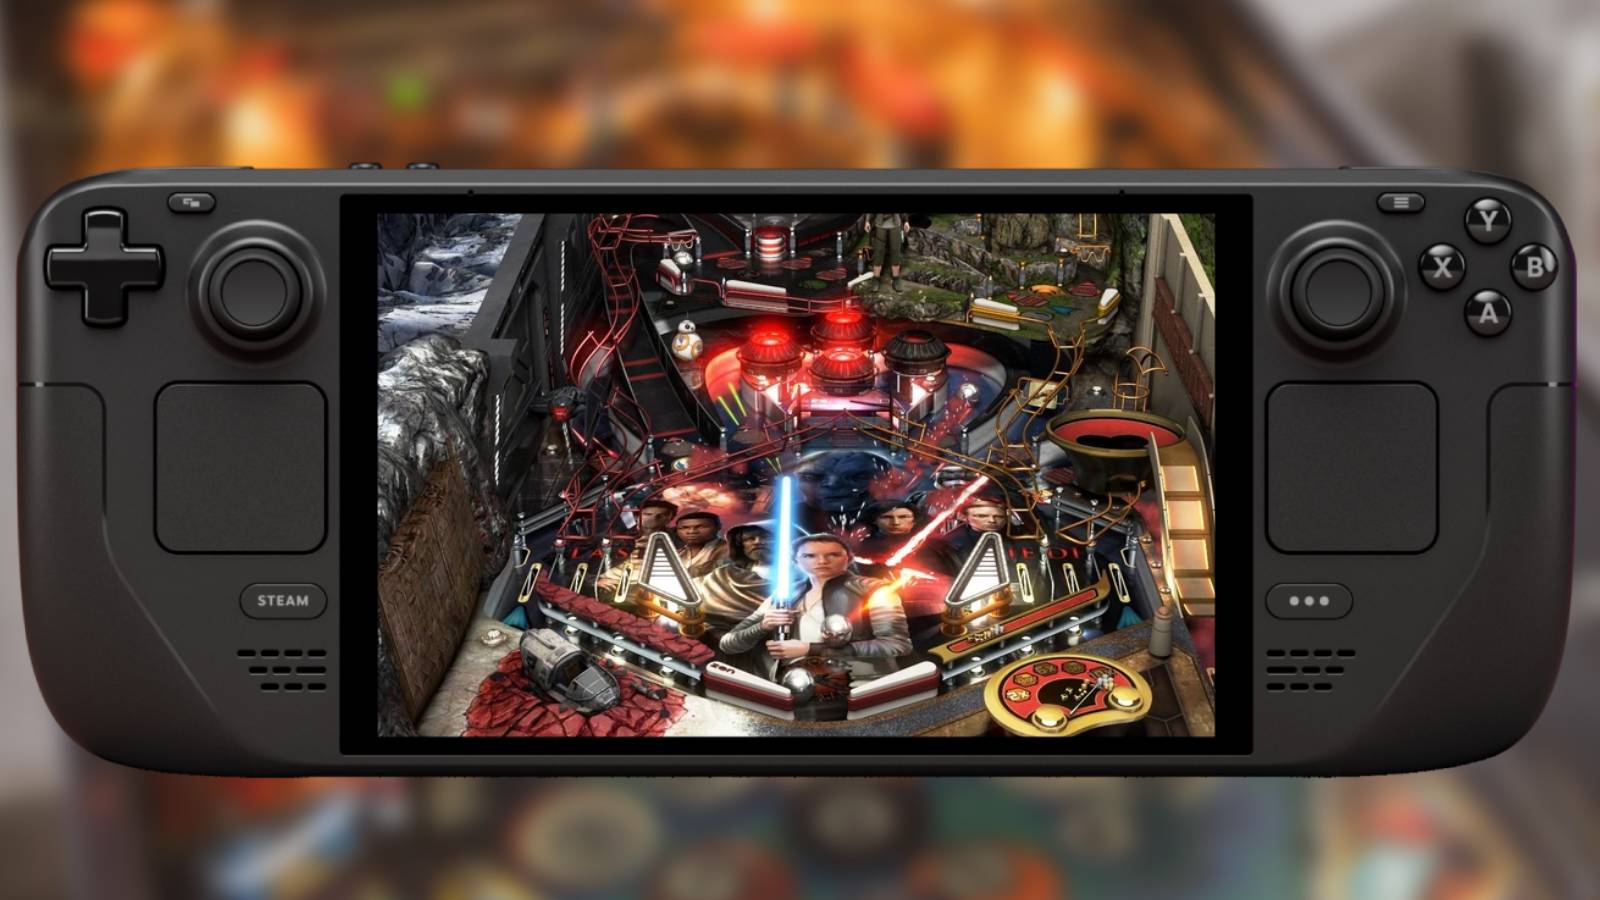 Image from Pexels.com by Vladimir Srajber in the background, with a Steam Deck on top displaying a screenshot of Star Wars: Episode VIII - The Last Jedi from Pinball FX3.